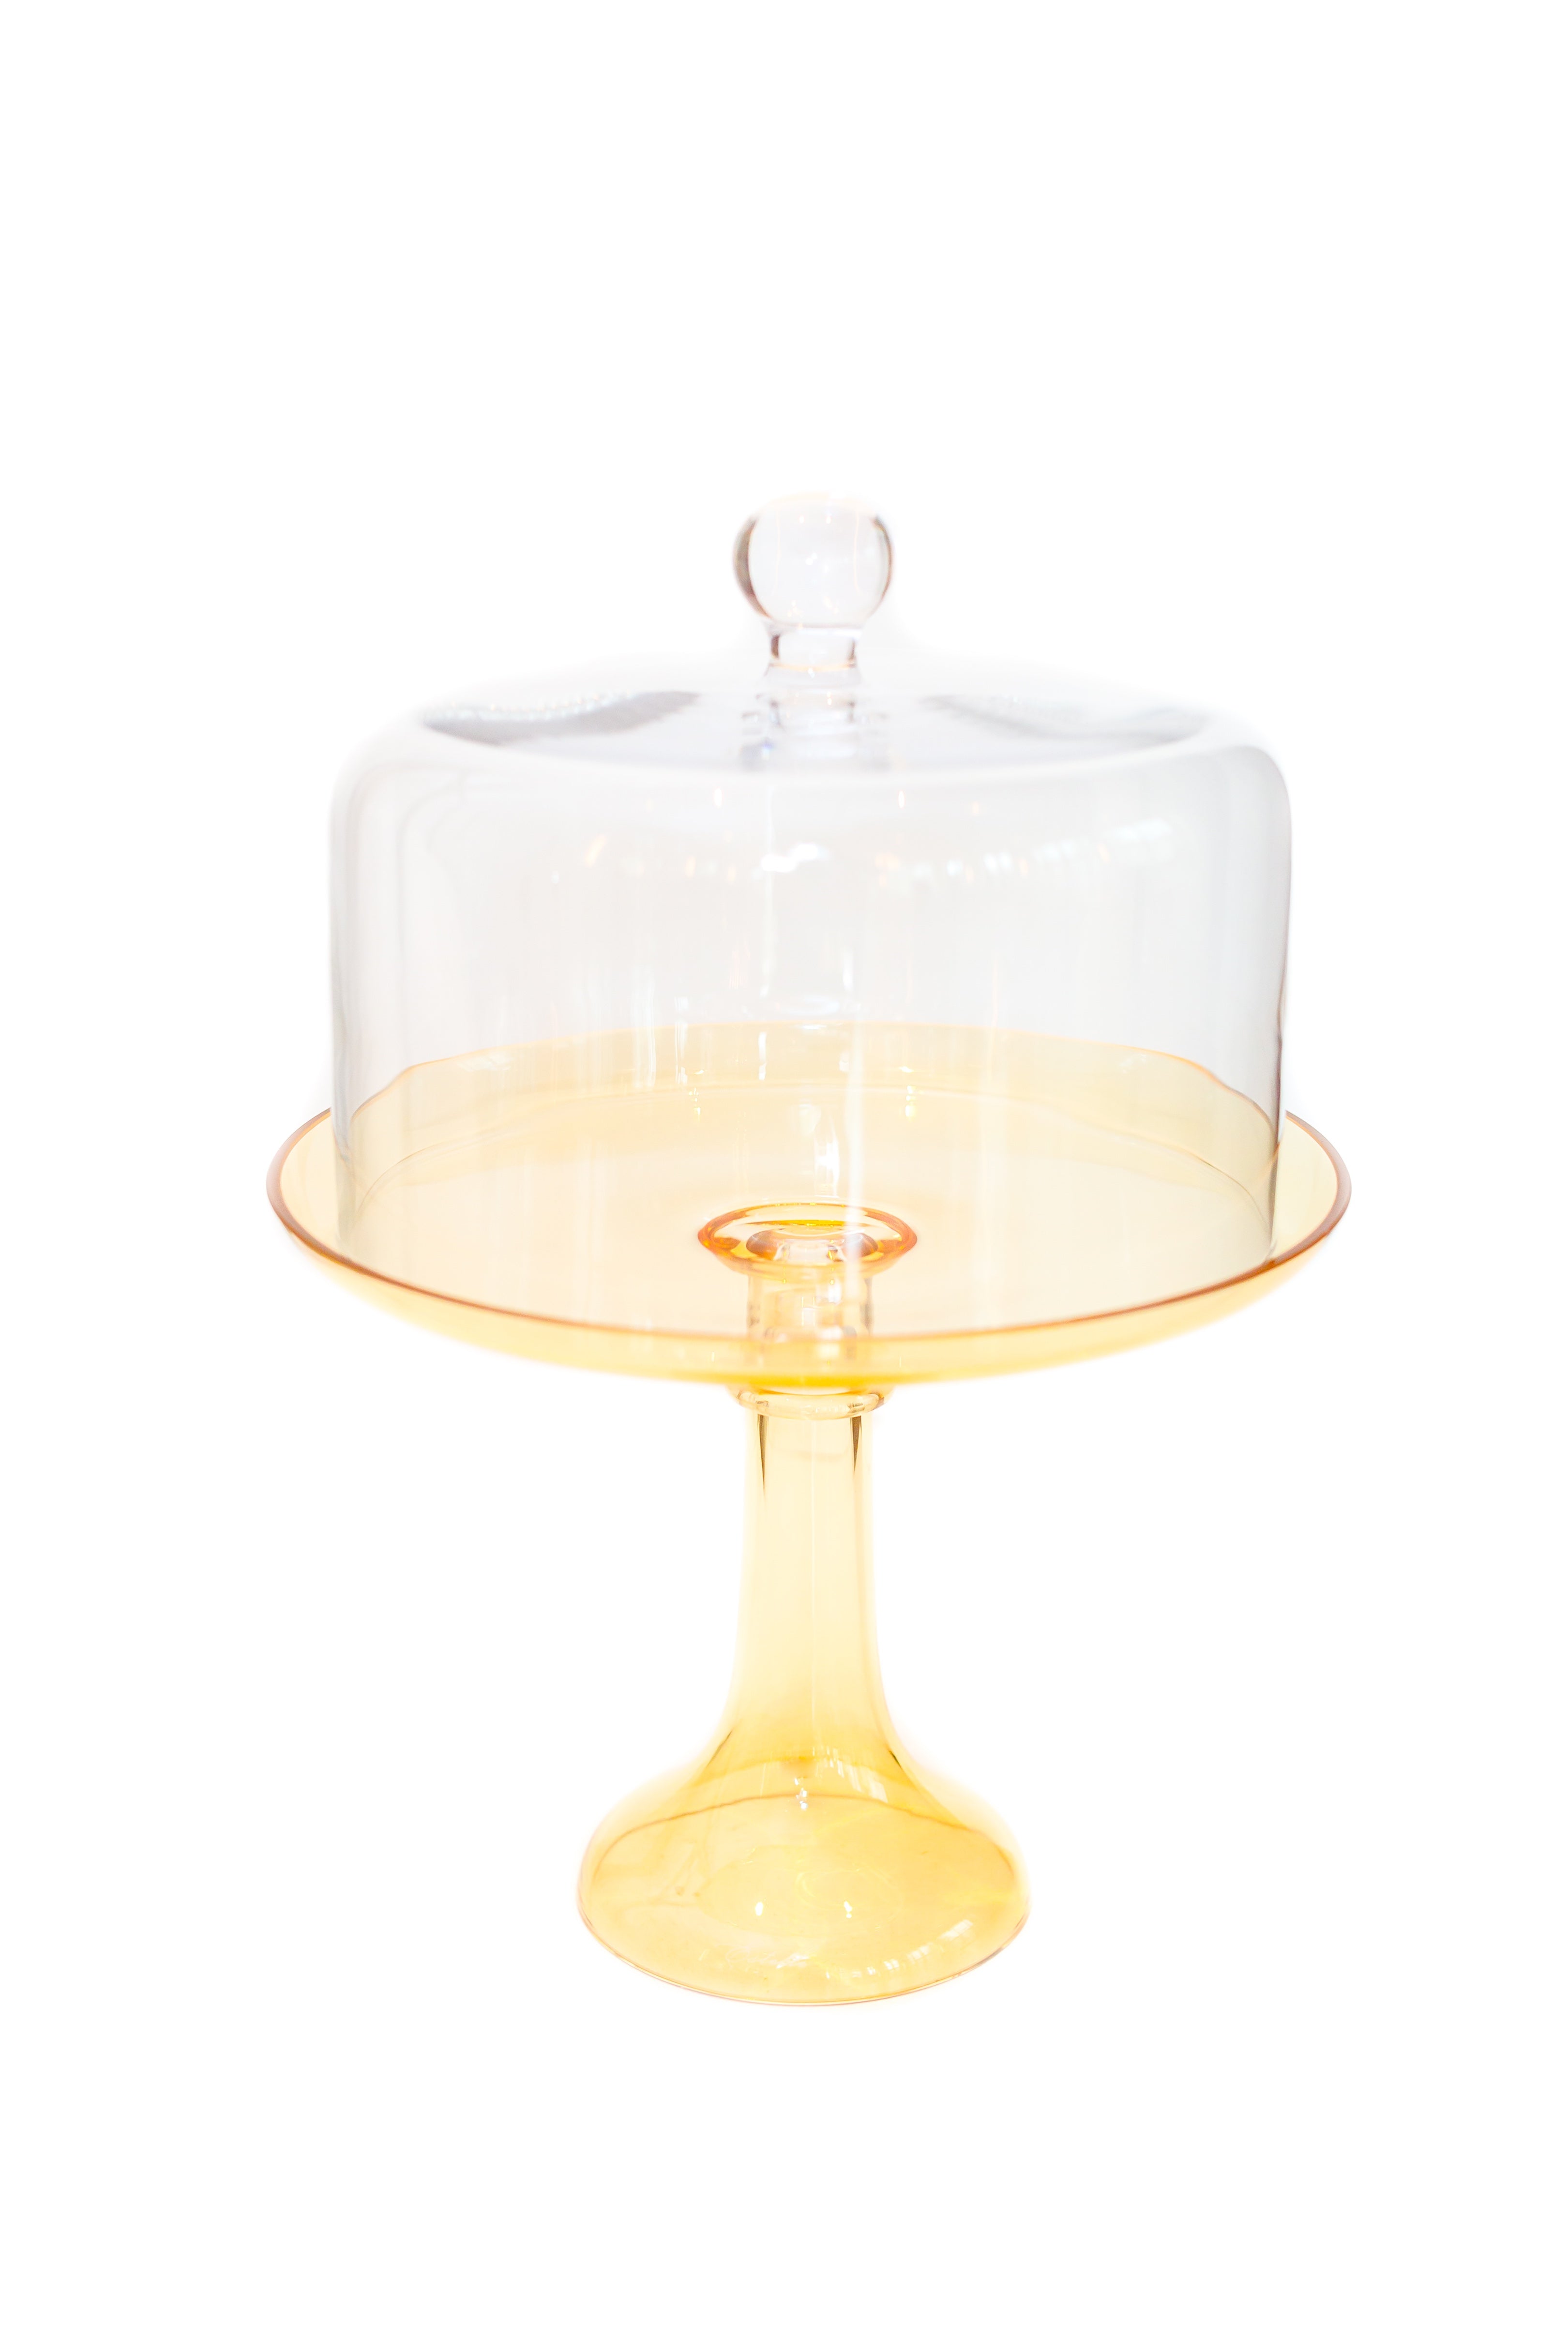 Denny International® 6 IN 1 CAKE STAND CLEAR ACRYLIC DOME LID SALAD PLATE  PUNCH BOWL CHIP DIP SERVER : Amazon.co.uk: Home & Kitchen